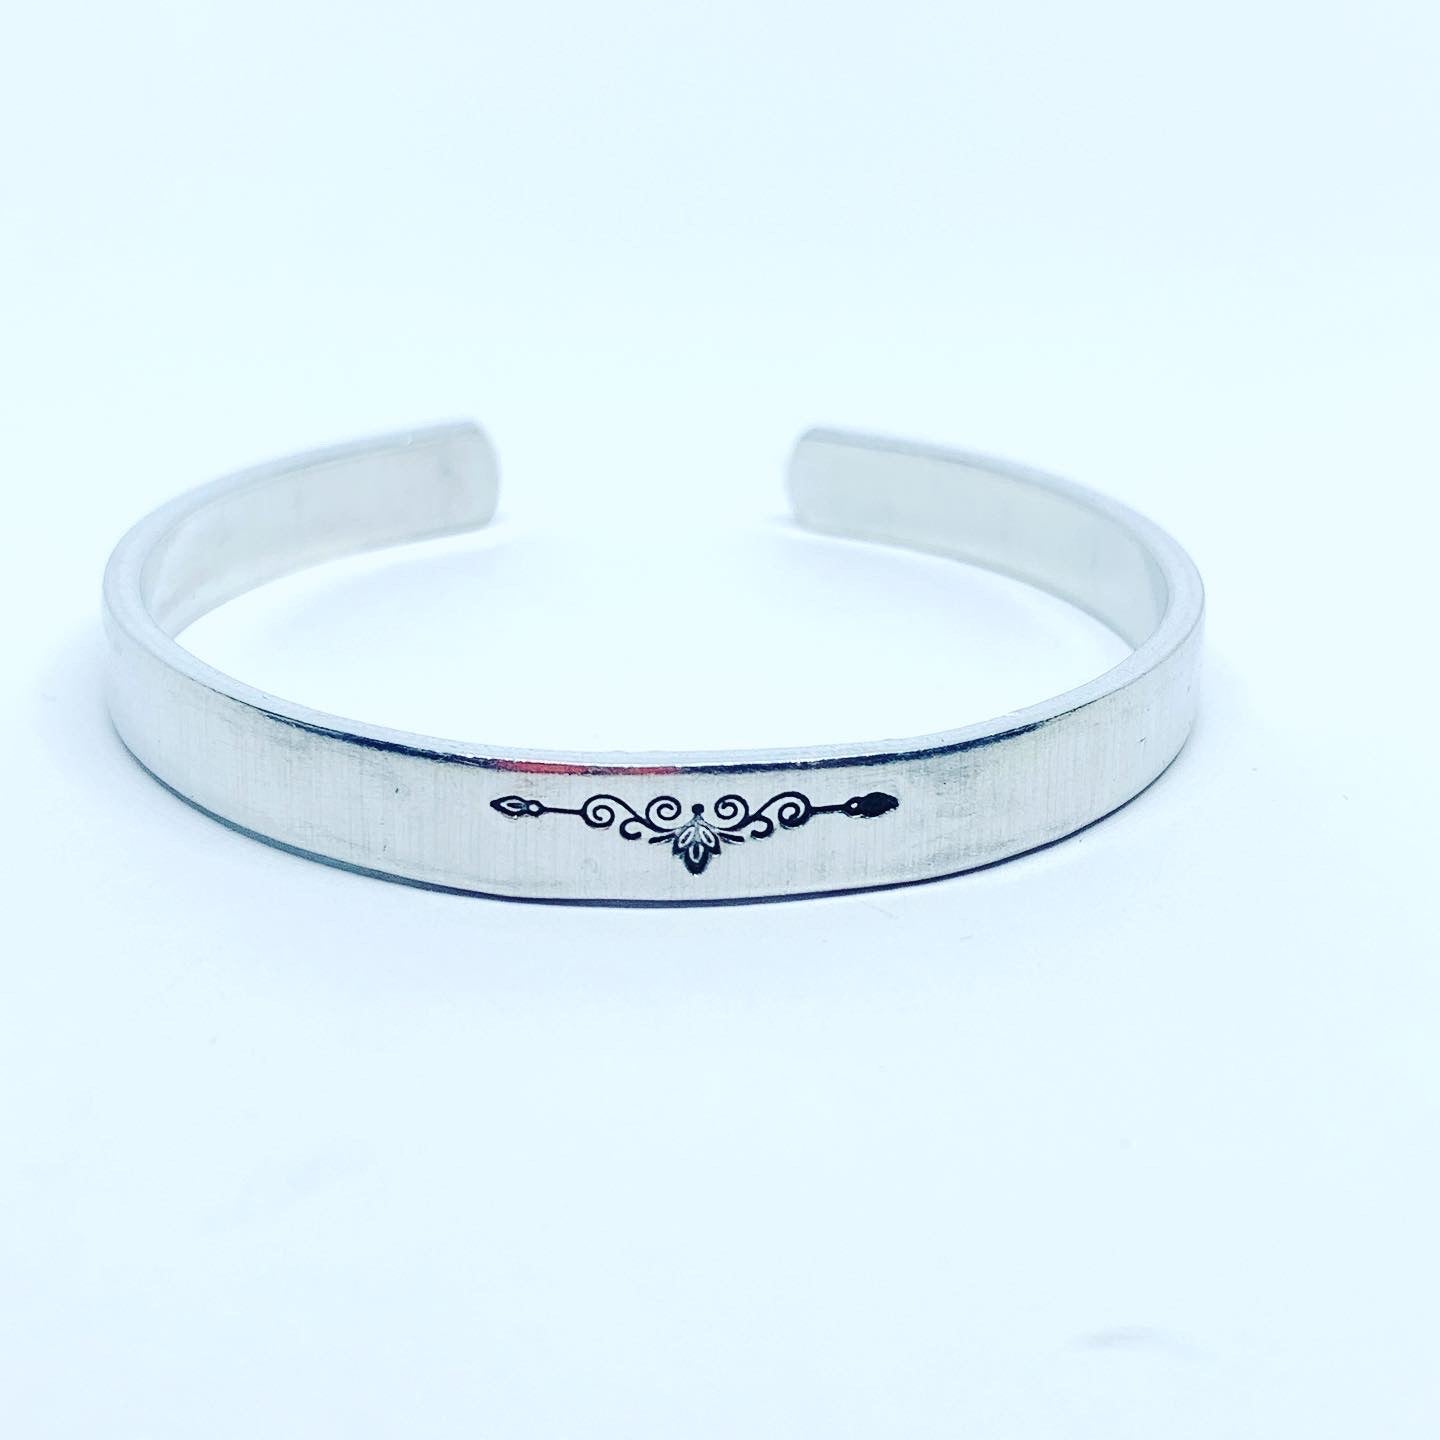 Keep Fucking Going (1/4”) - Hand Stamped Cuff Bracelet